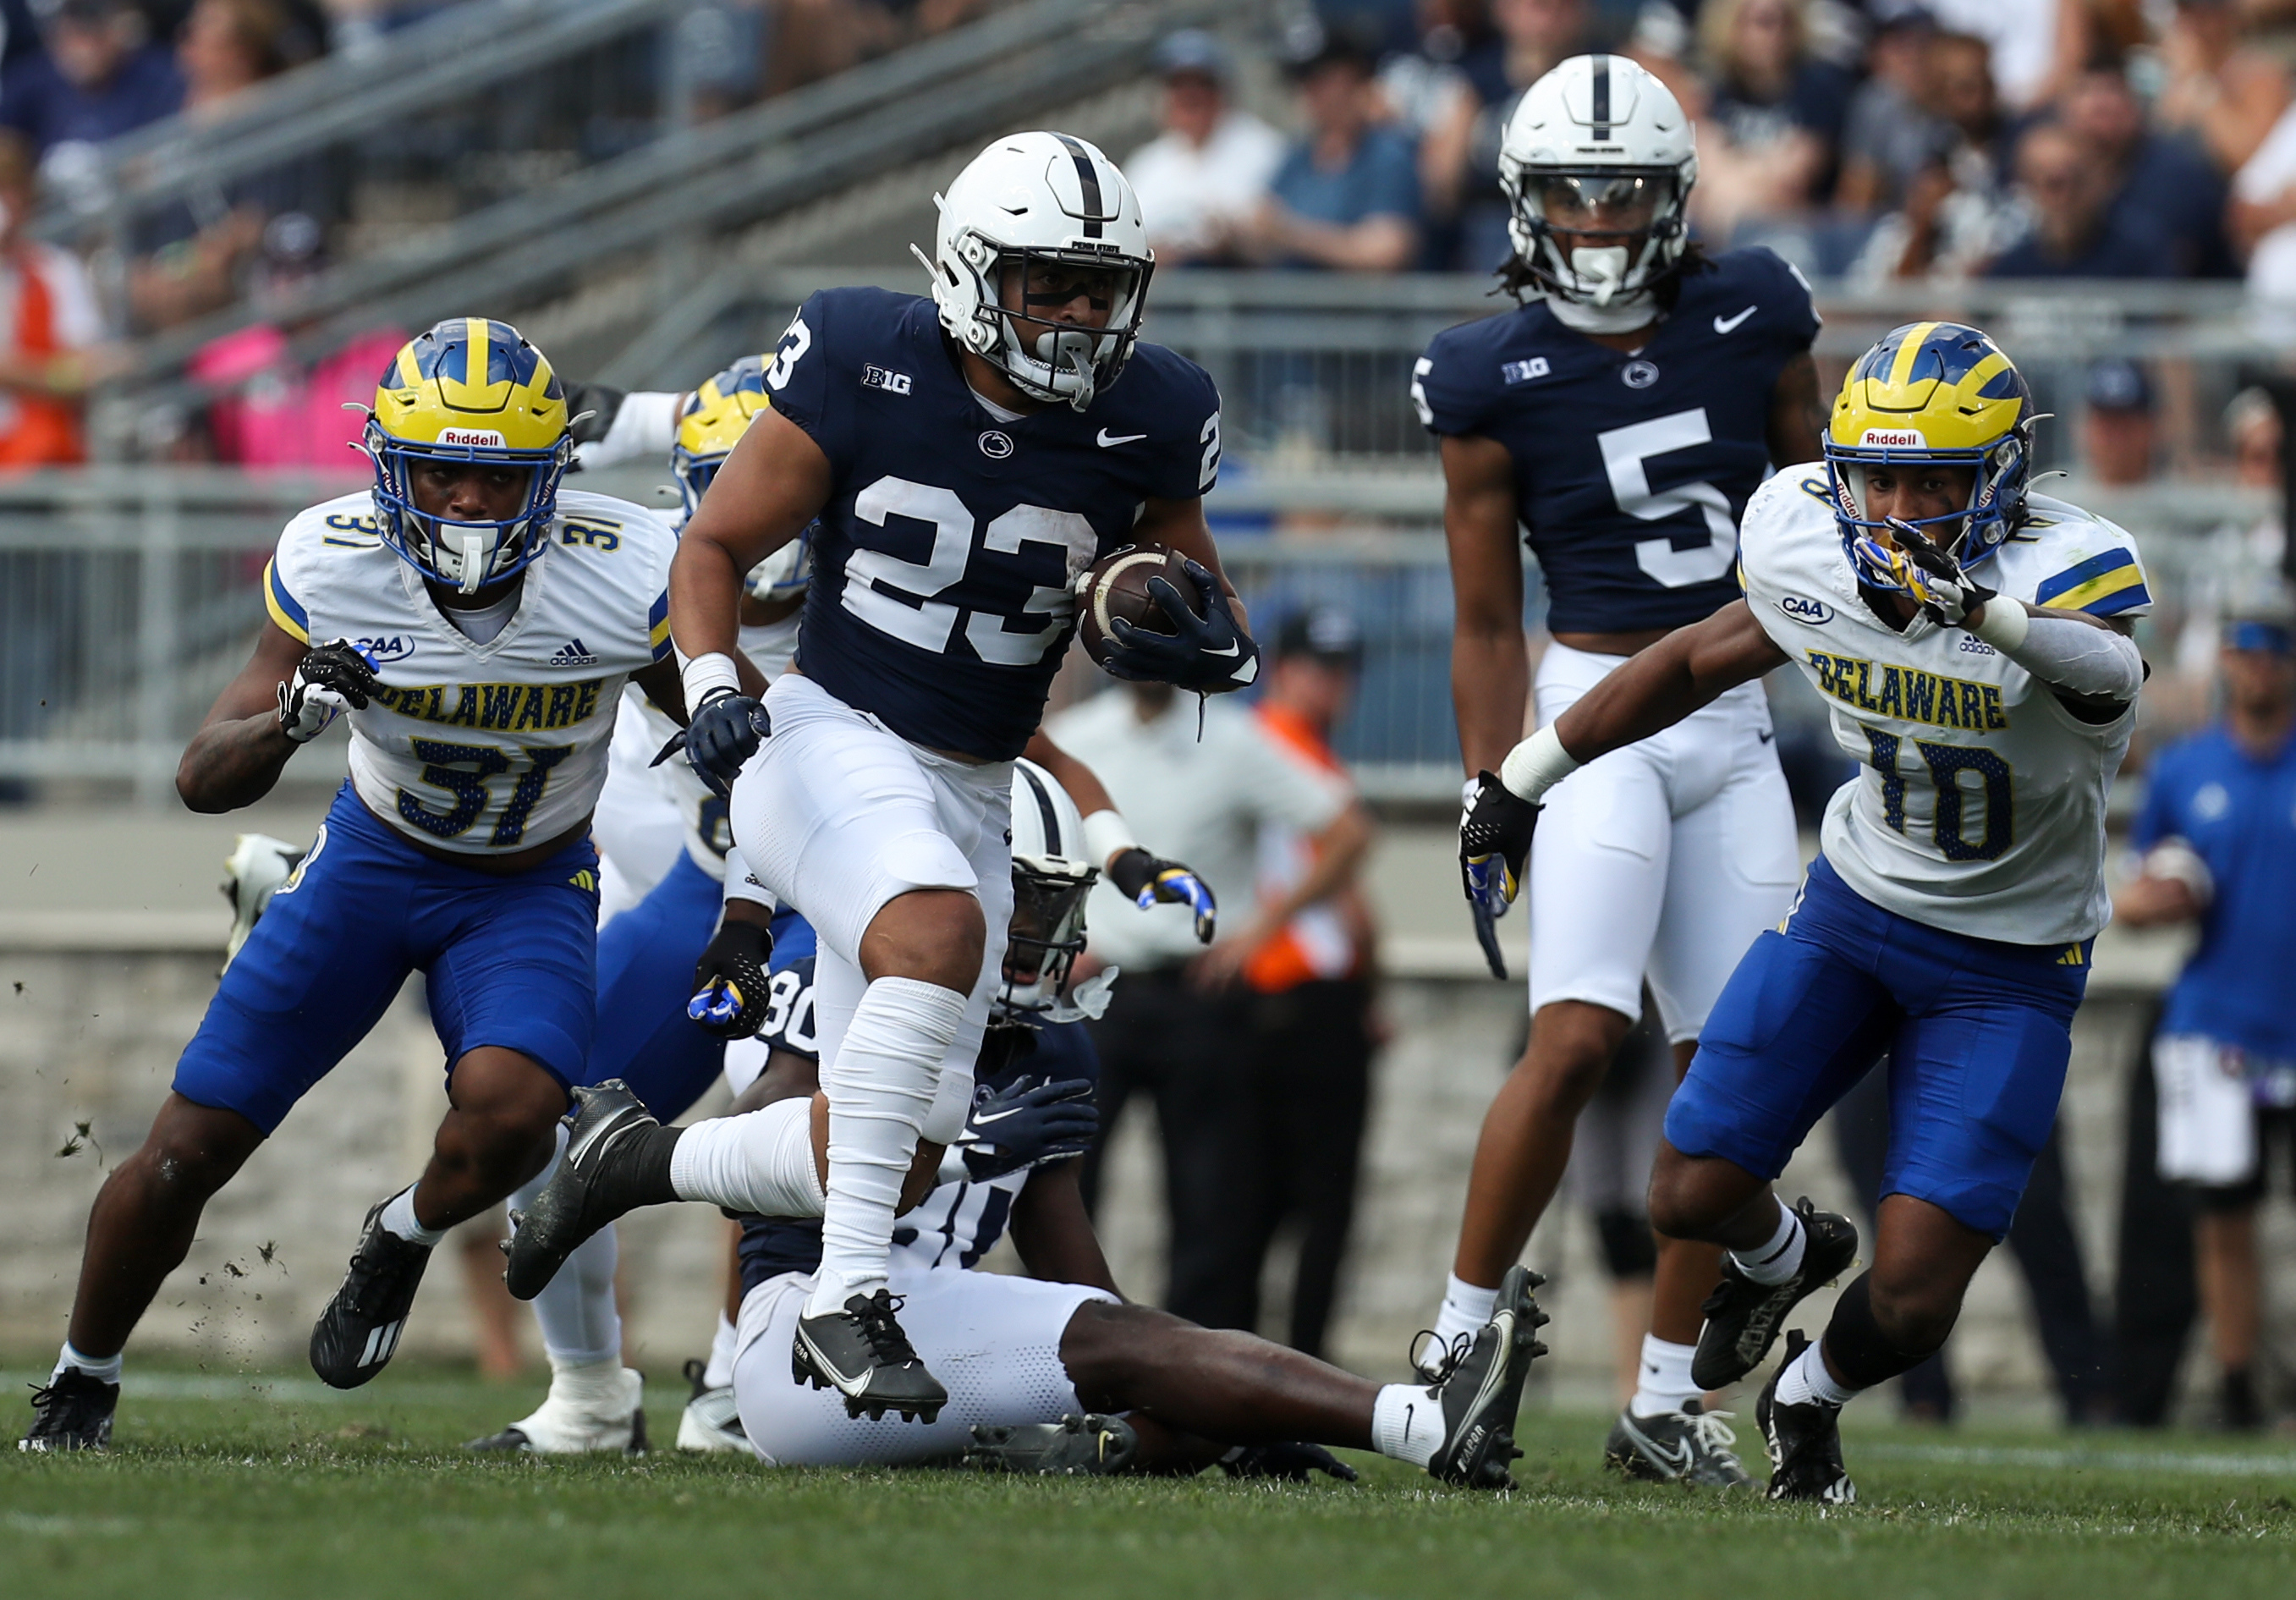 Penn State Nittany Lions running back Trey Potts (23) runs with the ball during the fourth quarter against the Delaware Fightin’ Blue Hens at Beaver Stadium.